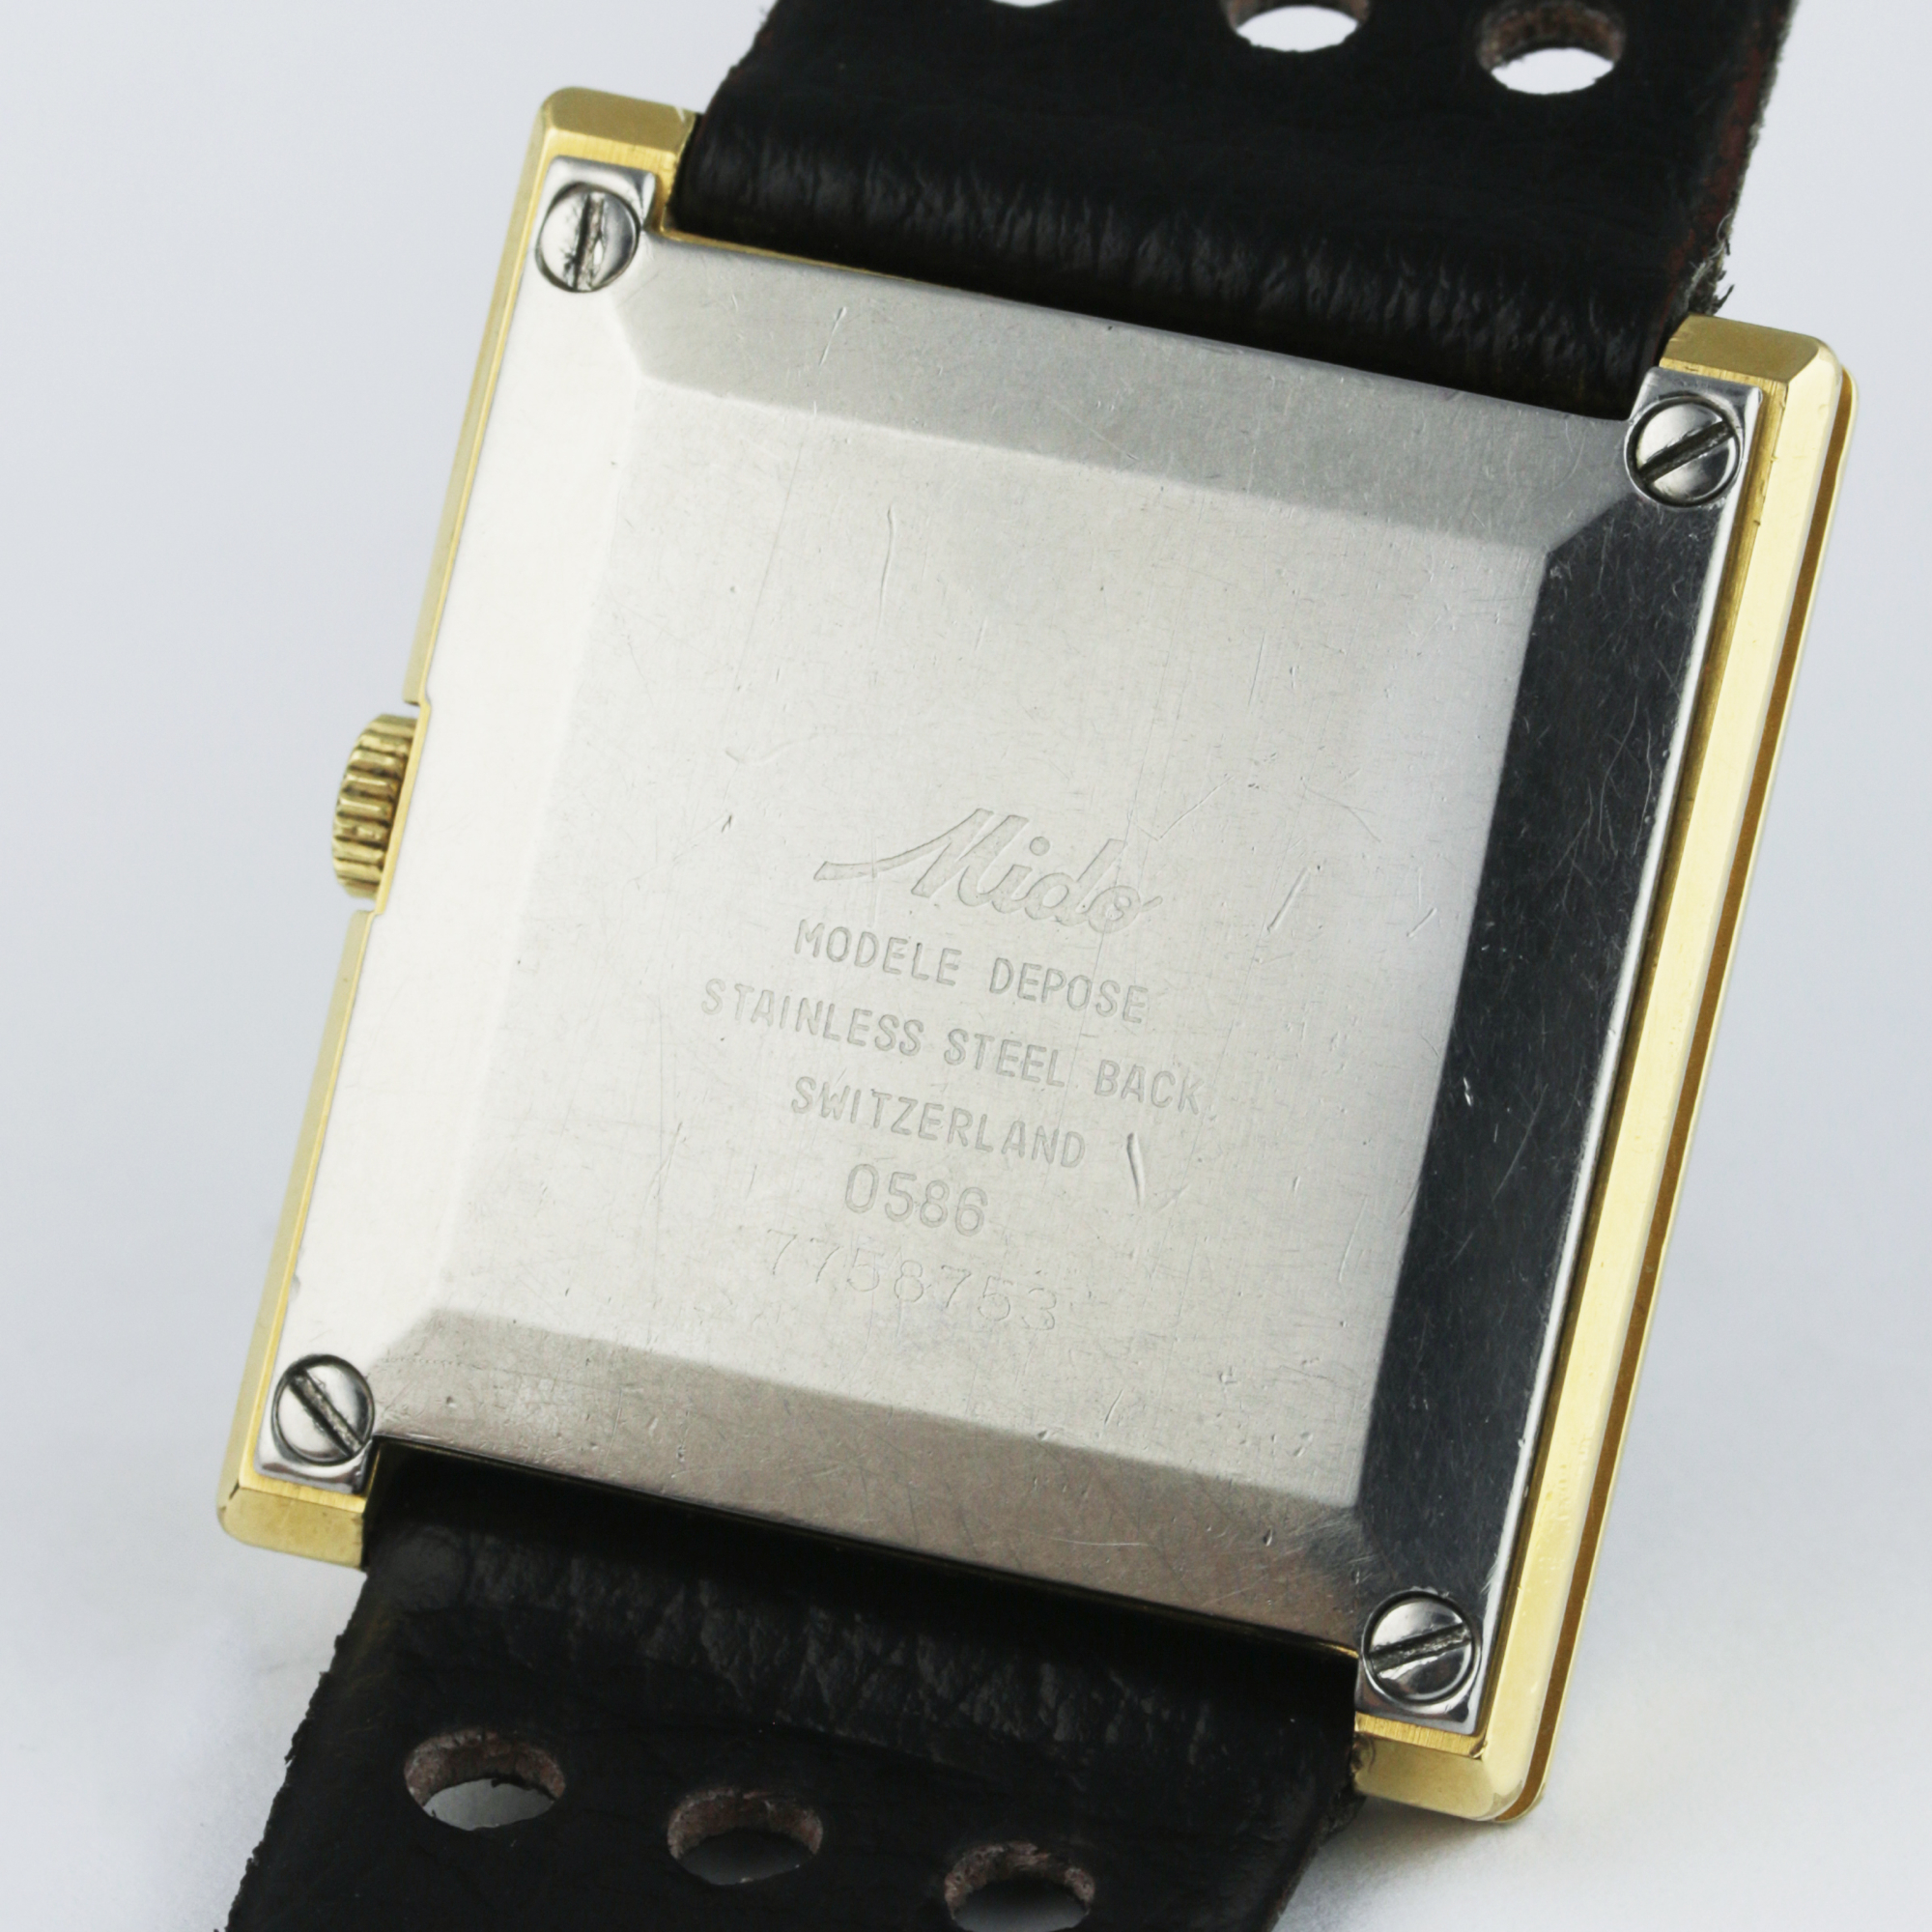 A GENTLEMAN'S GOLD PLATED MIDO AUTOMATIC WRIST WATCH CIRCA 1980s, COMMISSIONED BY THE UAE CENTRAL - Image 6 of 6